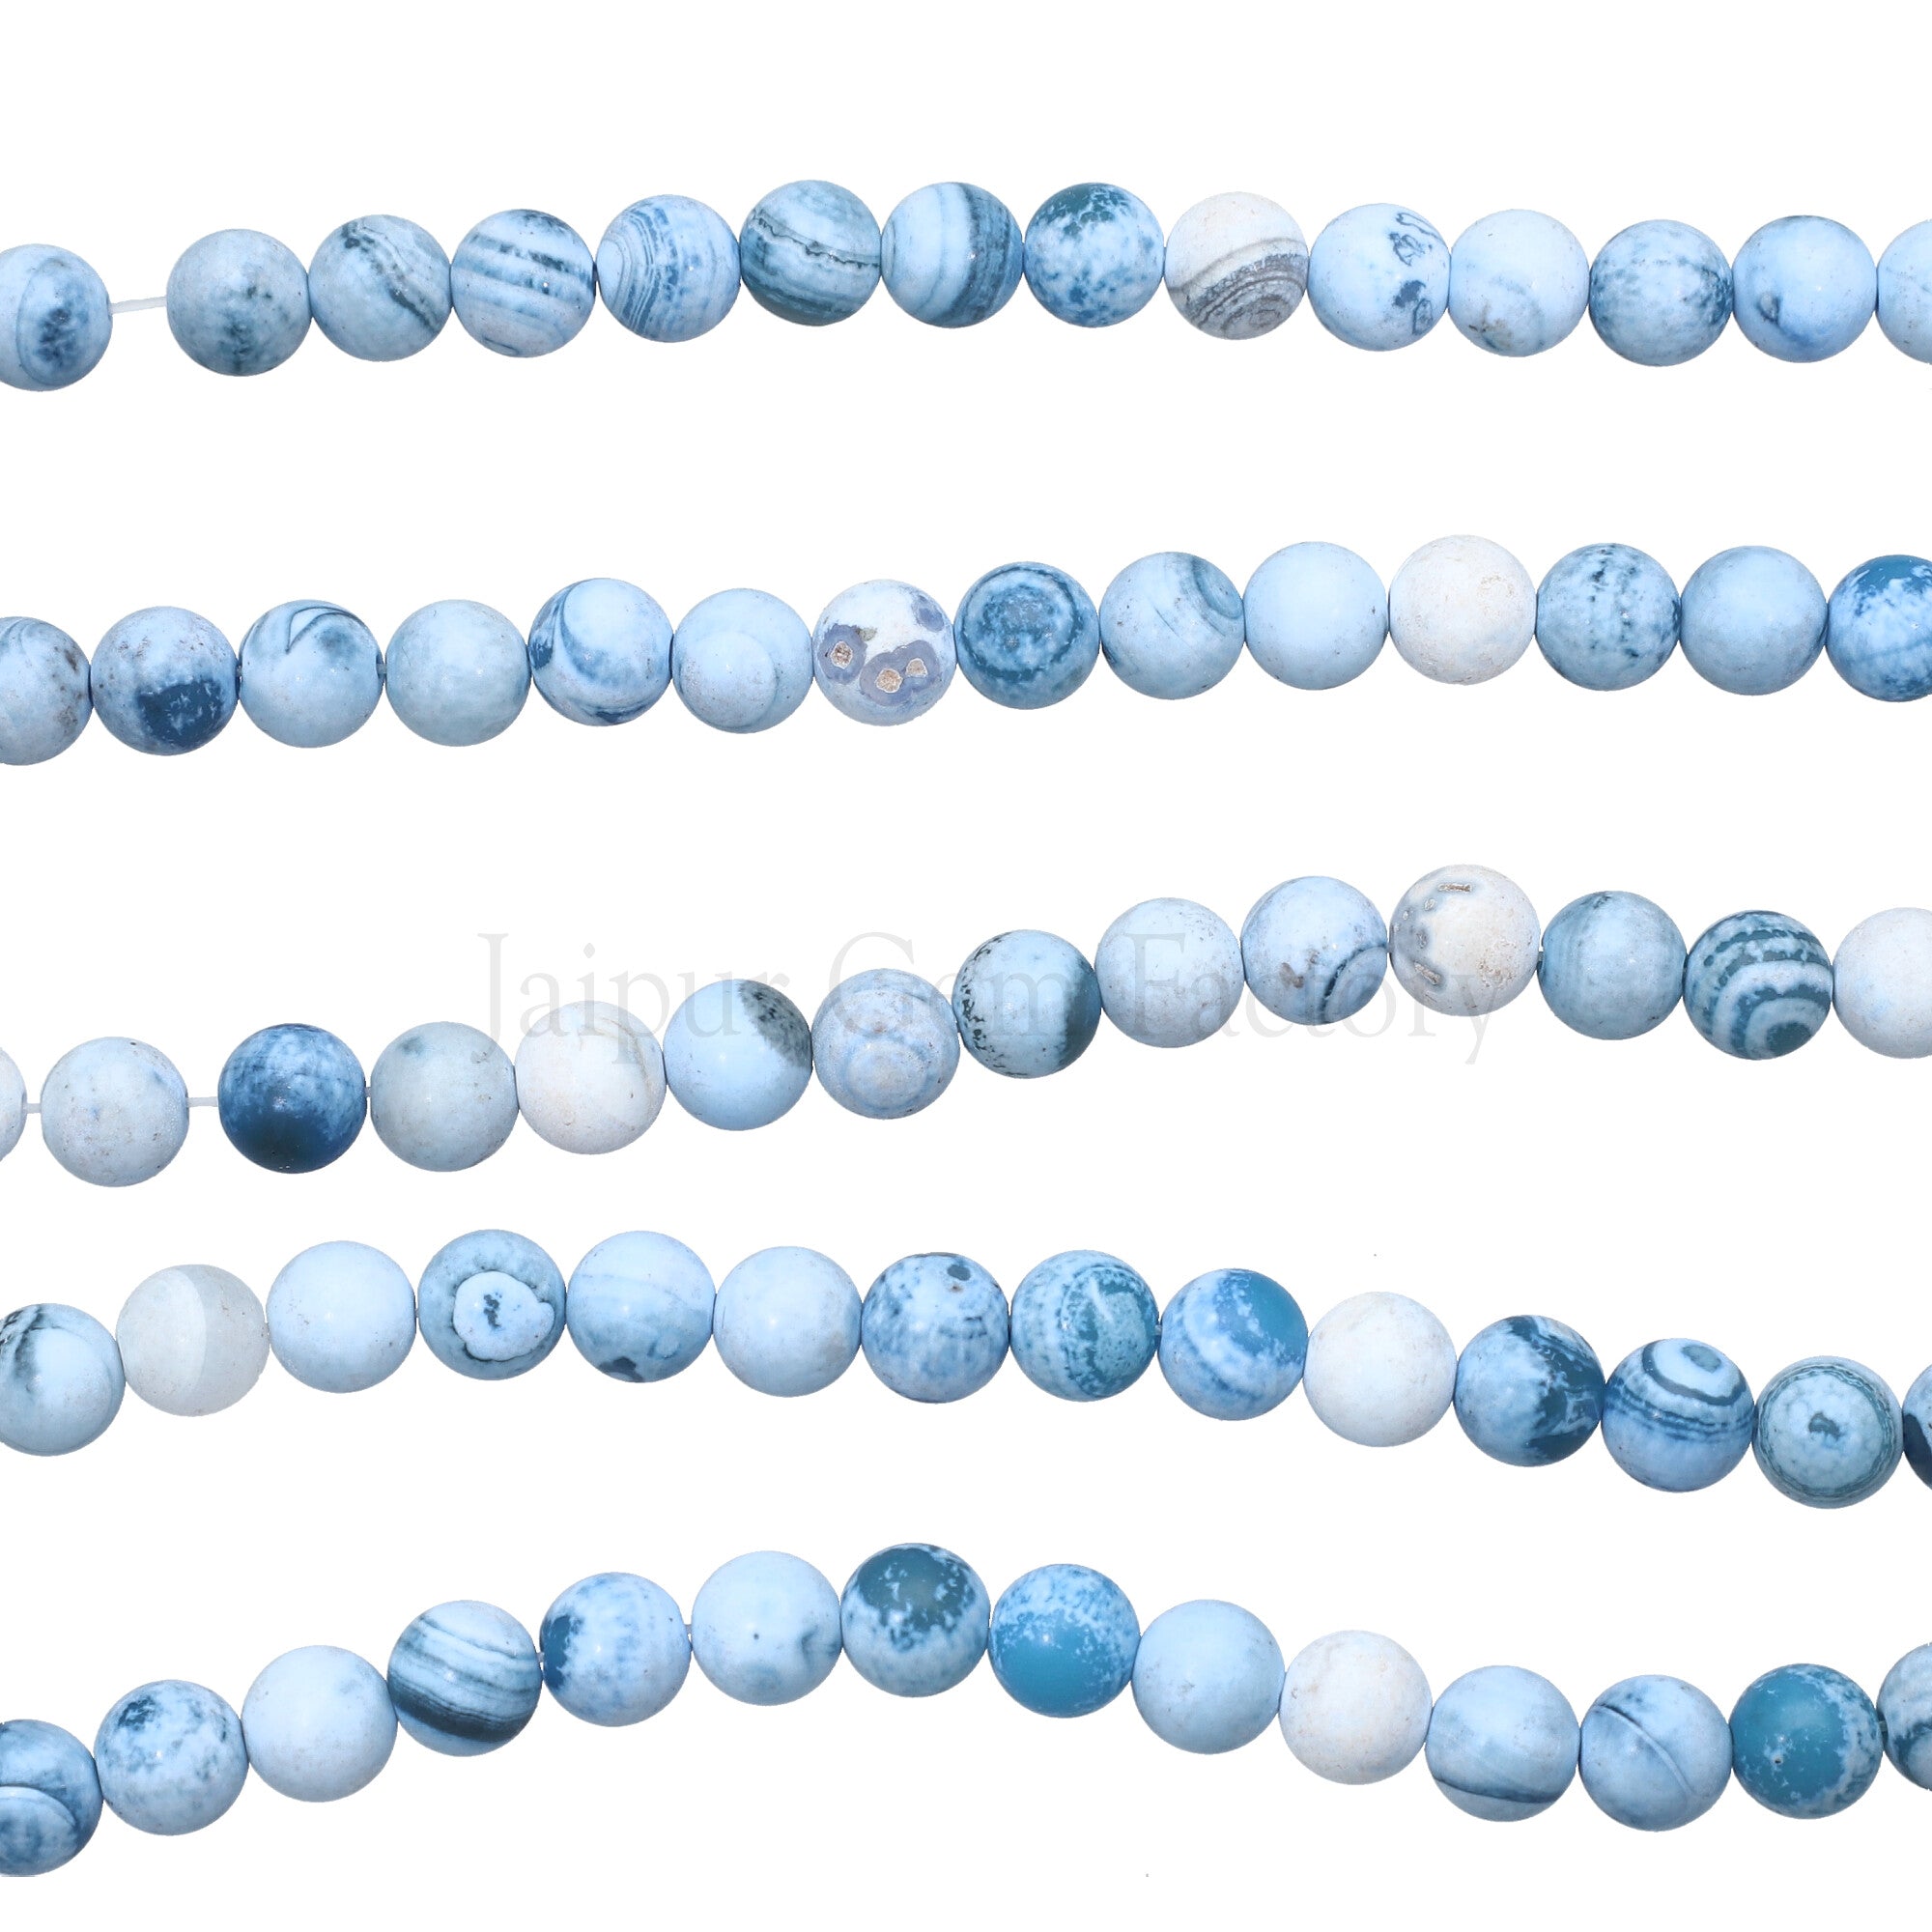 8 MM Blue White Lace Agate Smooth Round Beads 15 Inches Strand